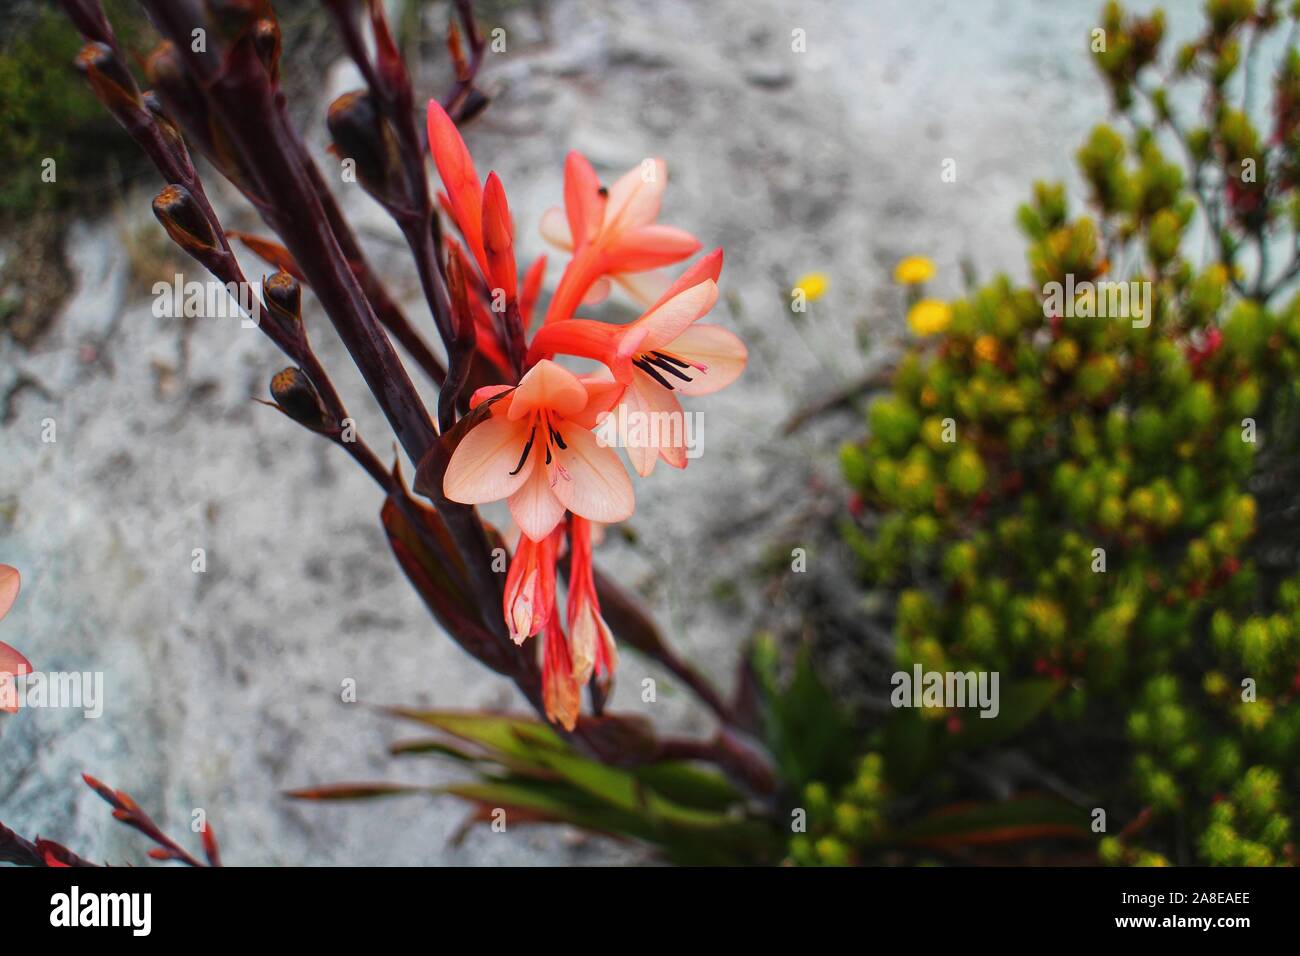 Watsonia tabularis on Table Mountain, Cape Town, South Africa. Watsonia is a genus in the iris family of plants native to Southern Africa. Stock Photo